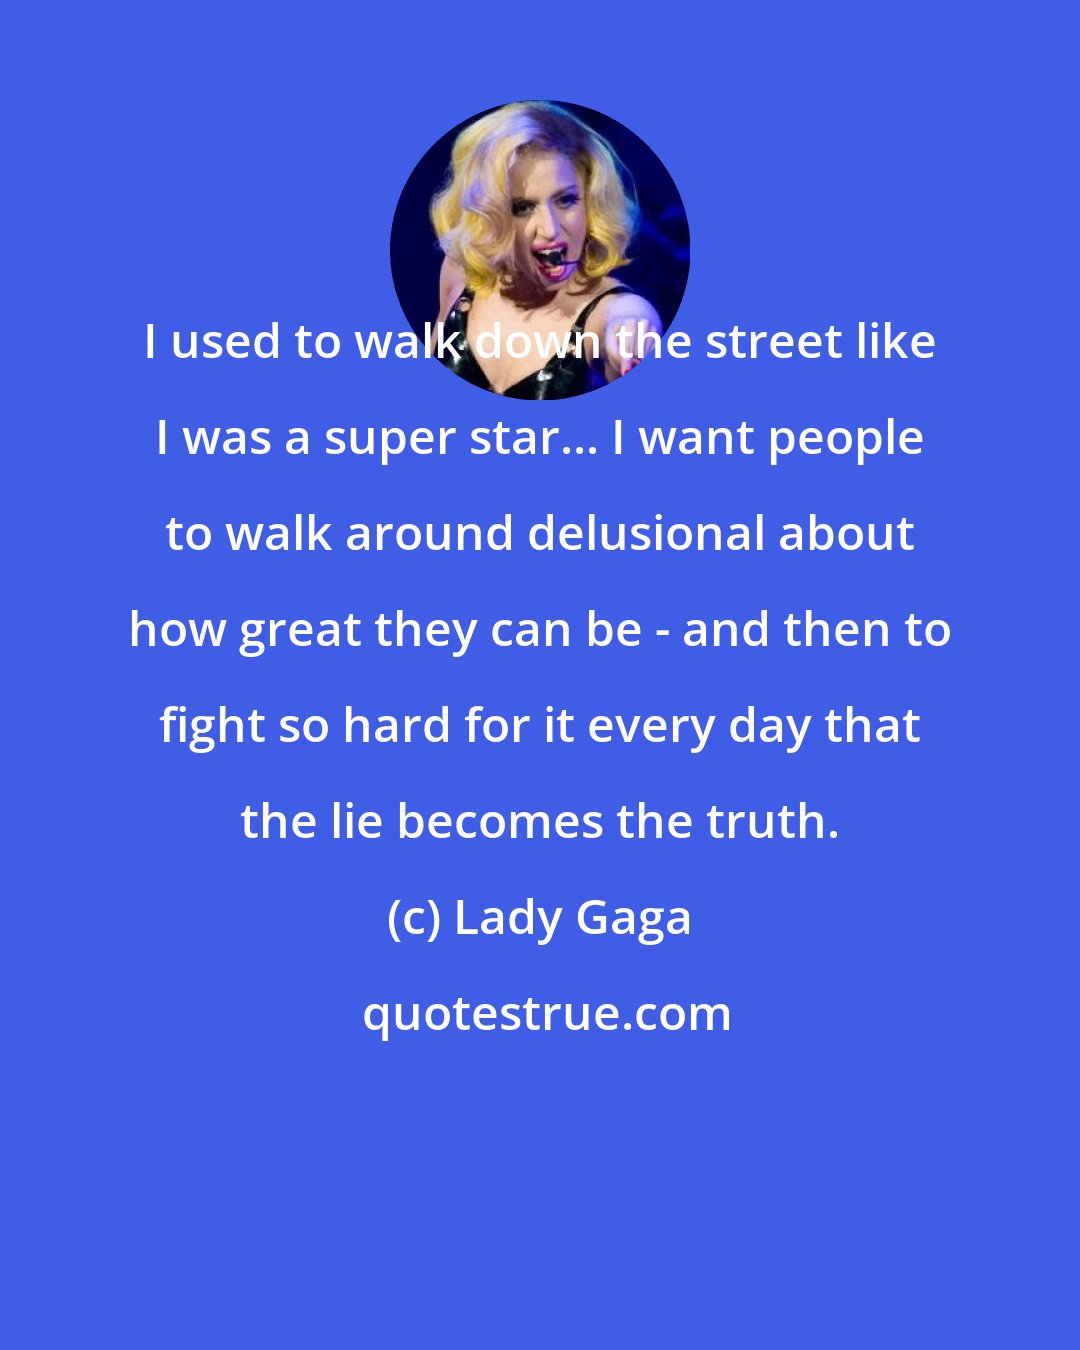 Lady Gaga: I used to walk down the street like I was a super star... I want people to walk around delusional about how great they can be - and then to fight so hard for it every day that the lie becomes the truth.